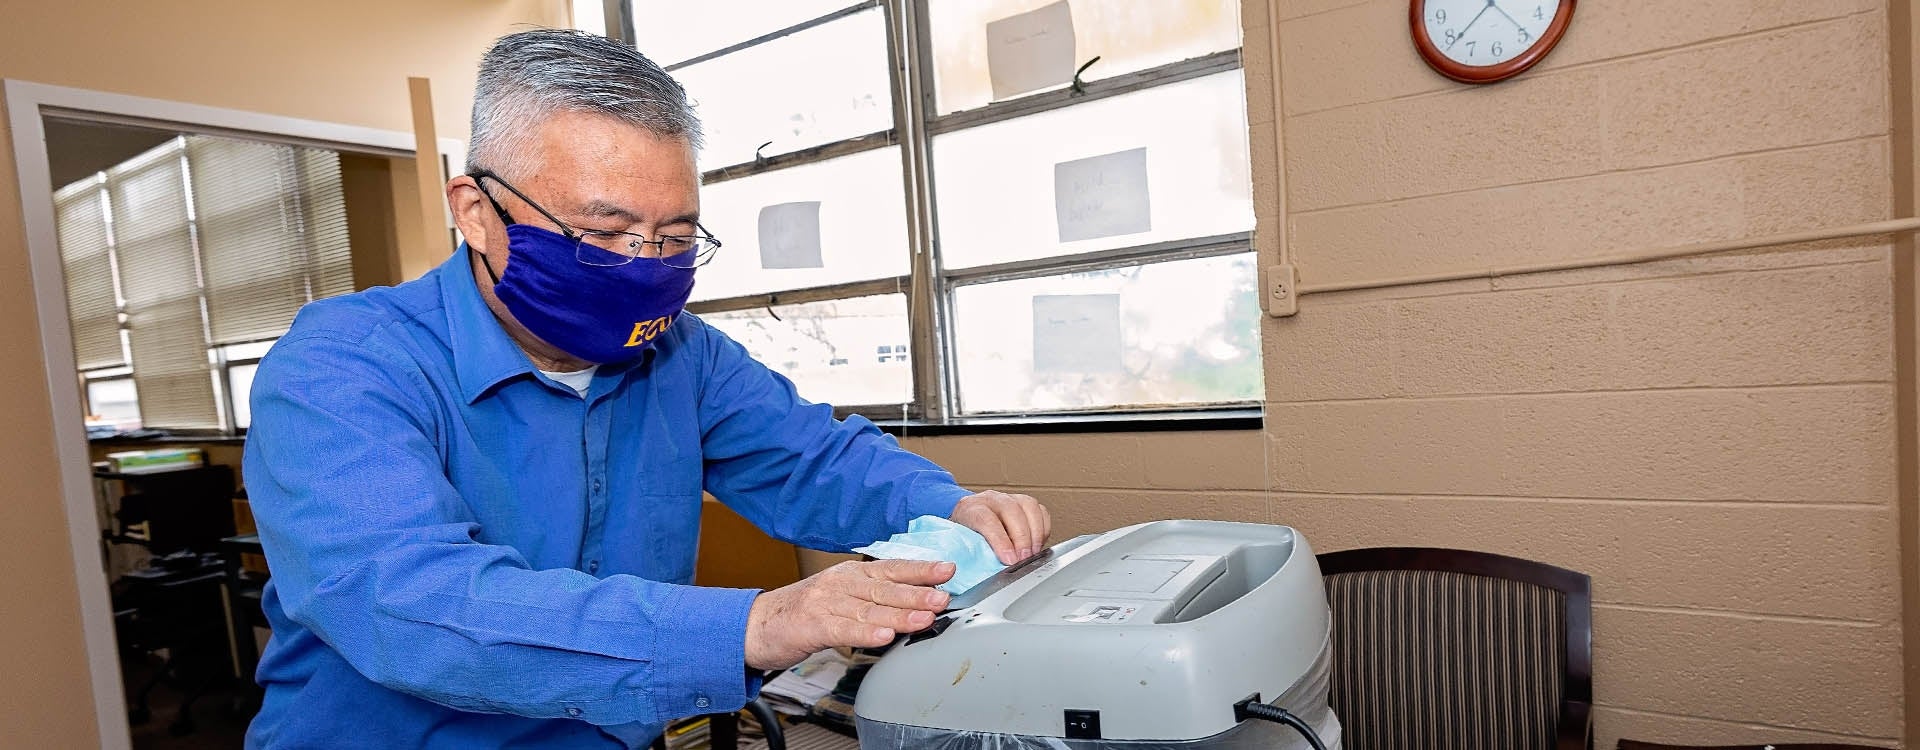 Dr. George Wang shreds surgical masks. This is part of research to determine if masks from the pandemic can be used as filler with asphalt. (ECU Photo by Cliff Hollis)